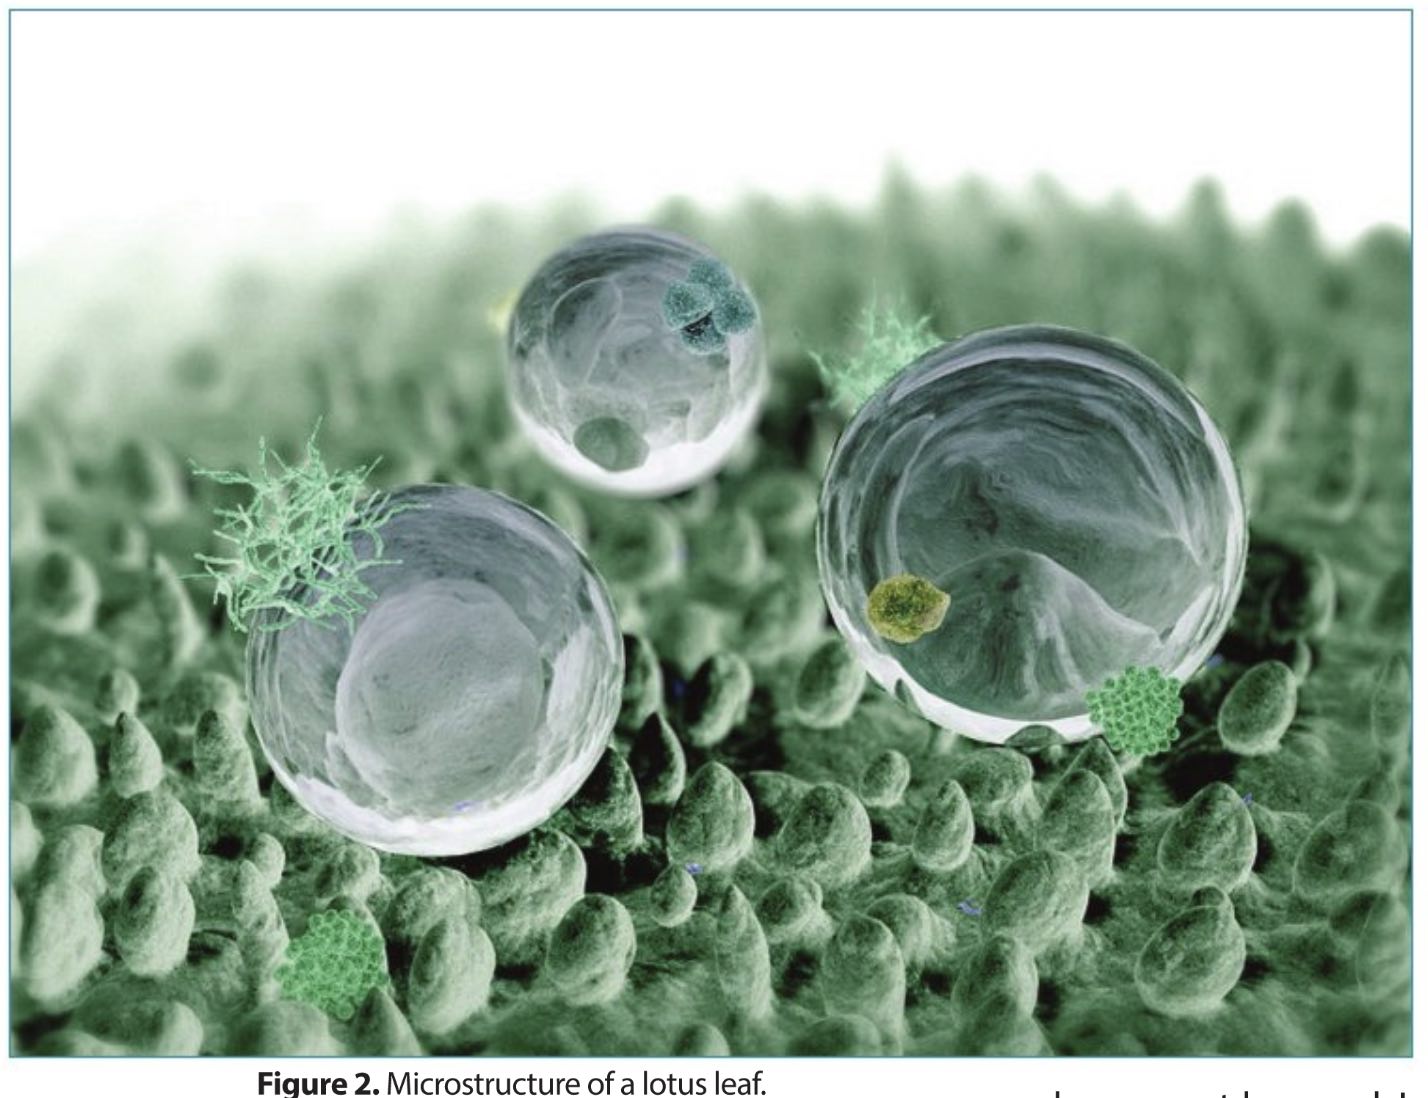 Functional Biomaterials: Self Cleaning Biological Materials